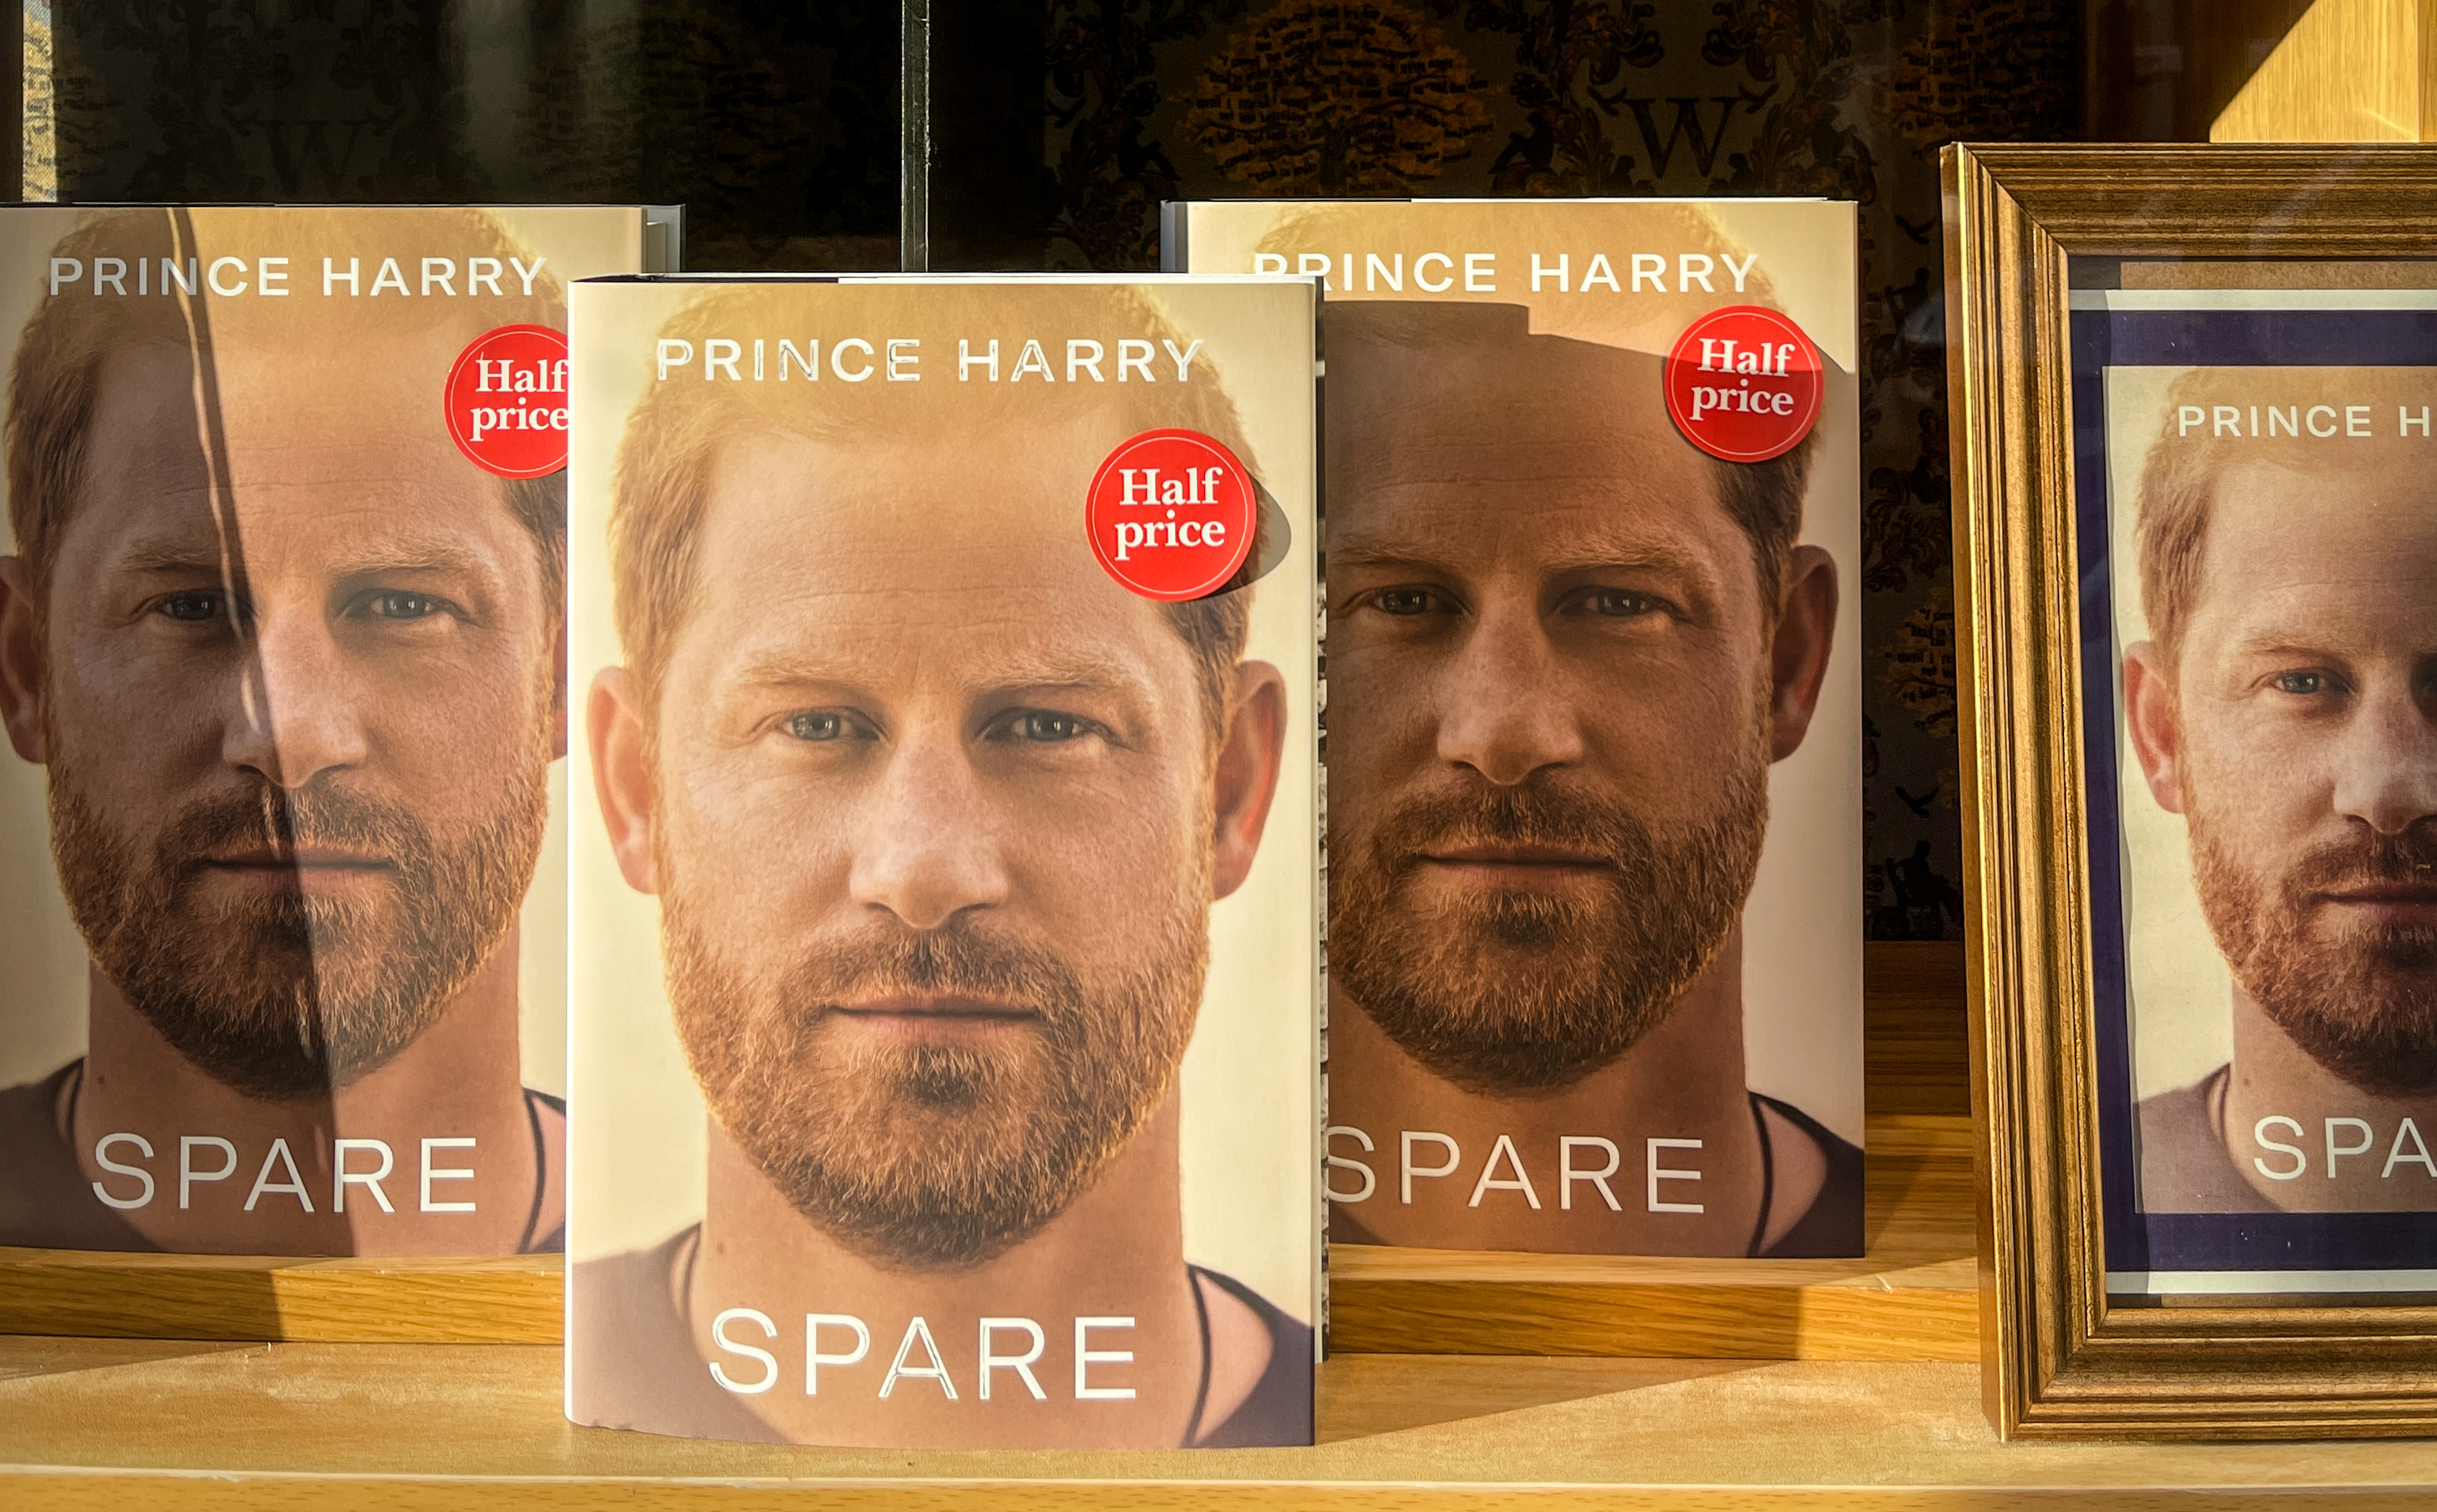 Prince Harry's book "Spare" on display in a book store in Bath, UK on January 11, 2023 | Source: Getty Images